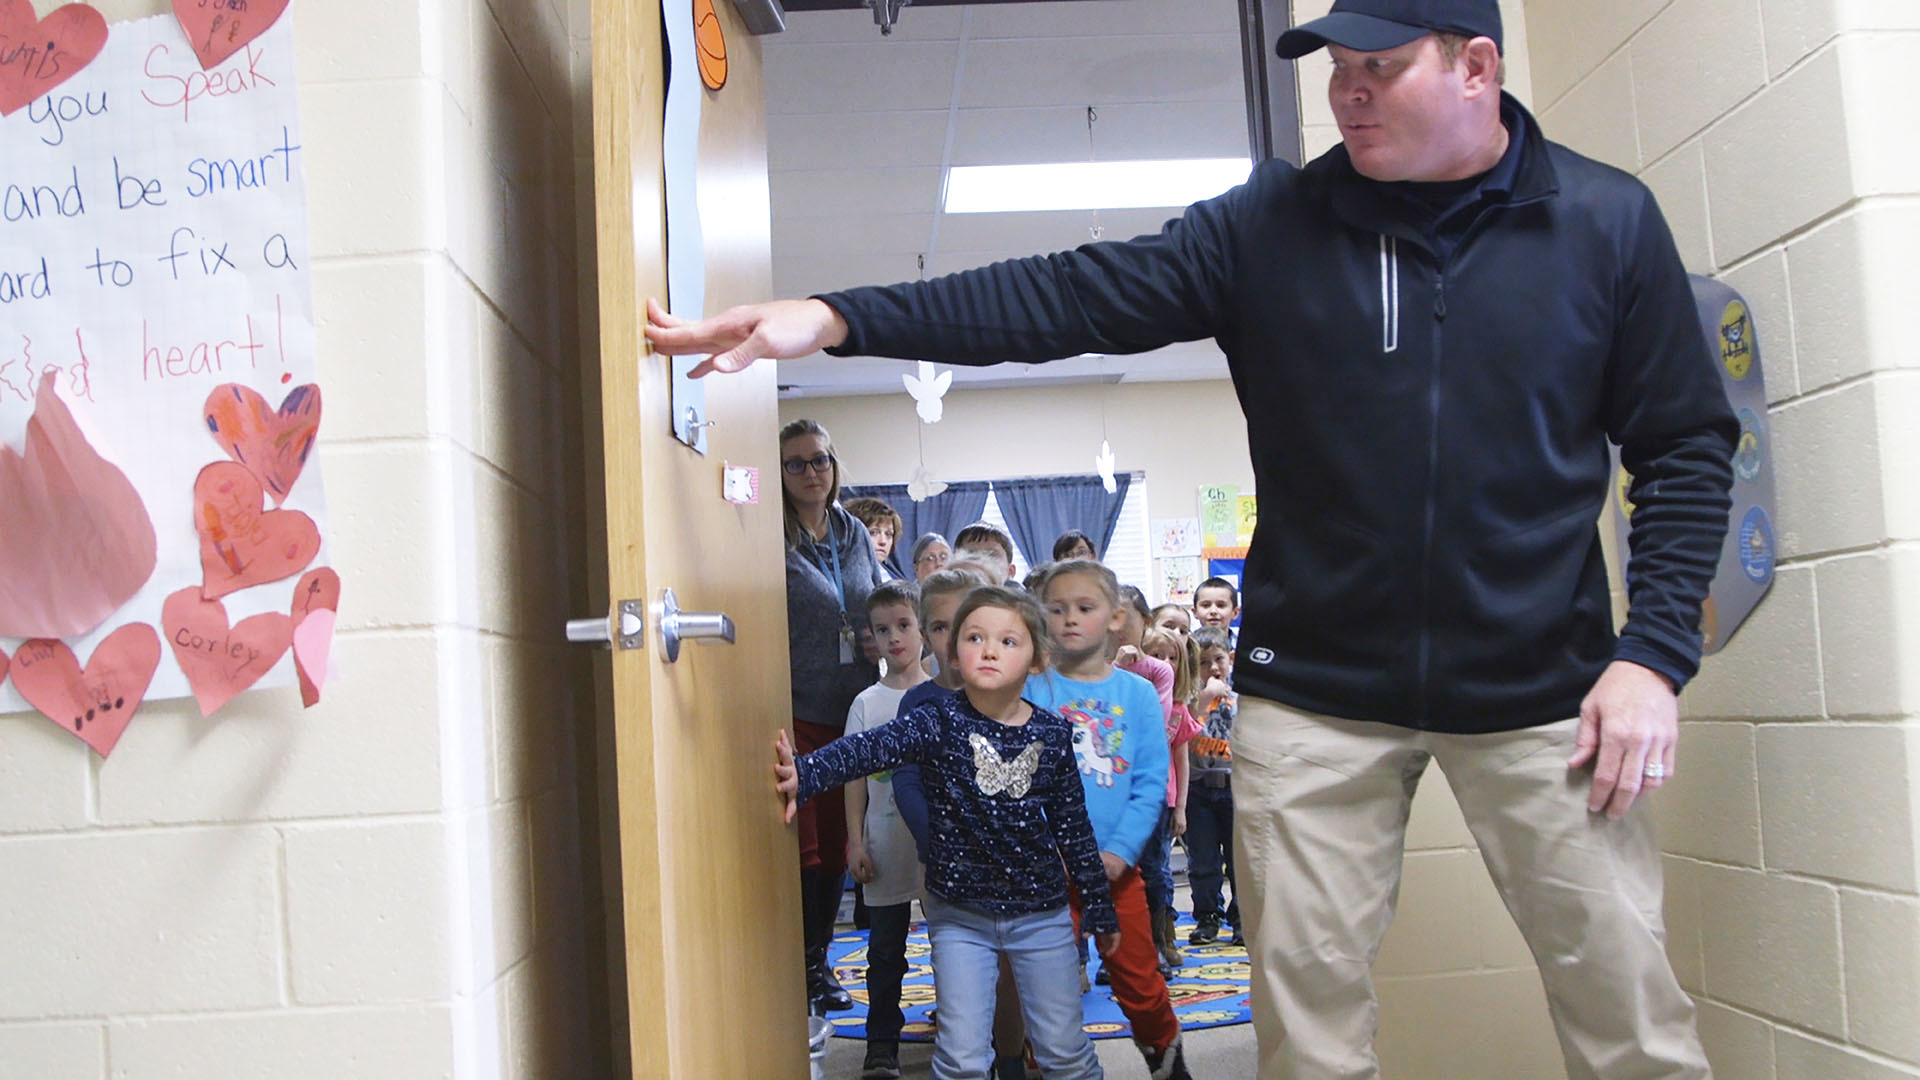 A young student helps the trainer hold a door open as her class practices an evacuation drill.